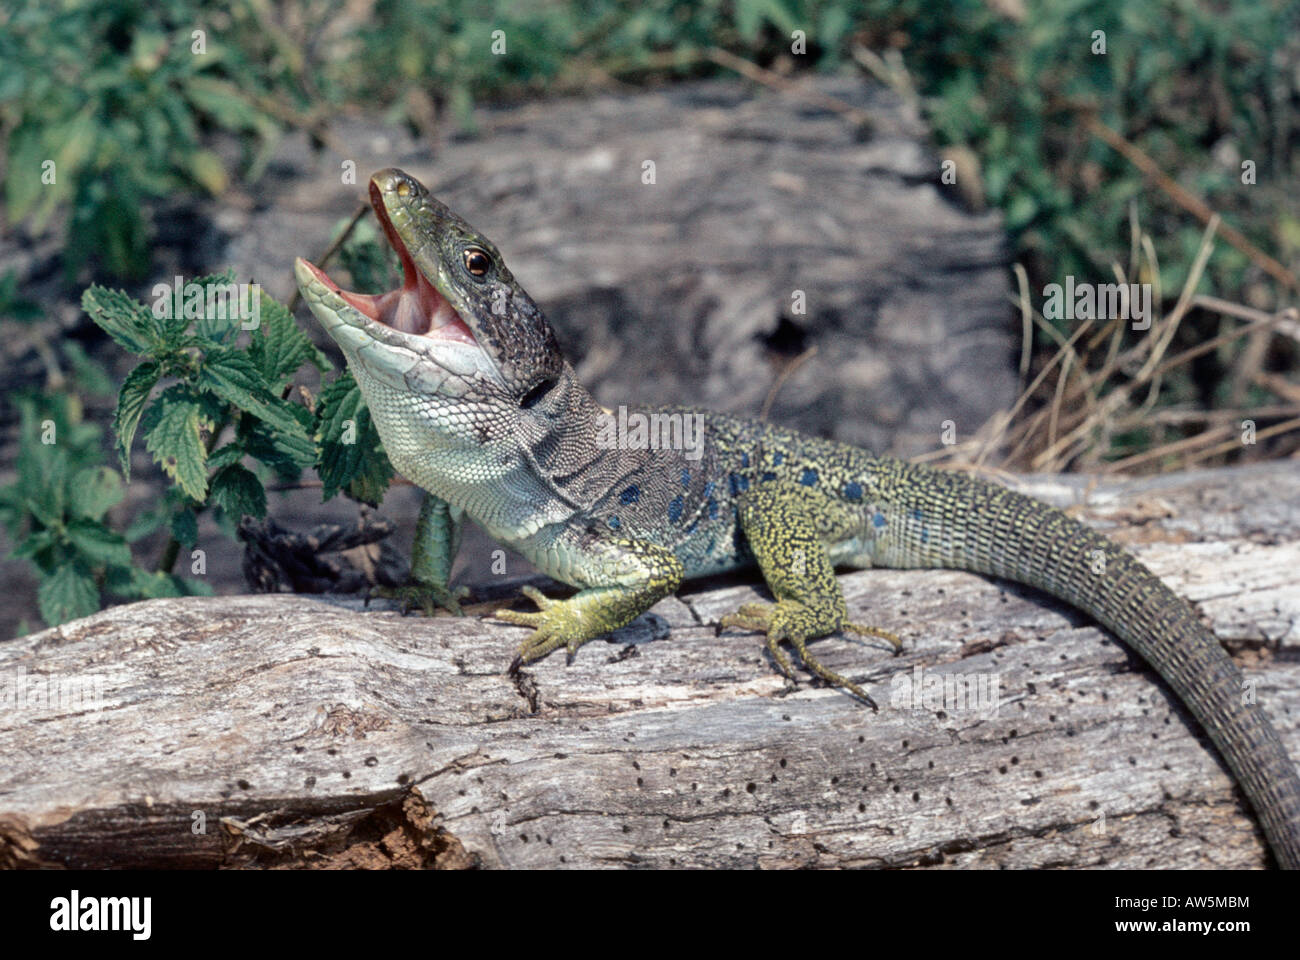 Lezard ocelle Ocellated lizard Lacerta lepida animal animaux adultes animaux portrait Europe Europa format horizontal d'autres animaux Banque D'Images